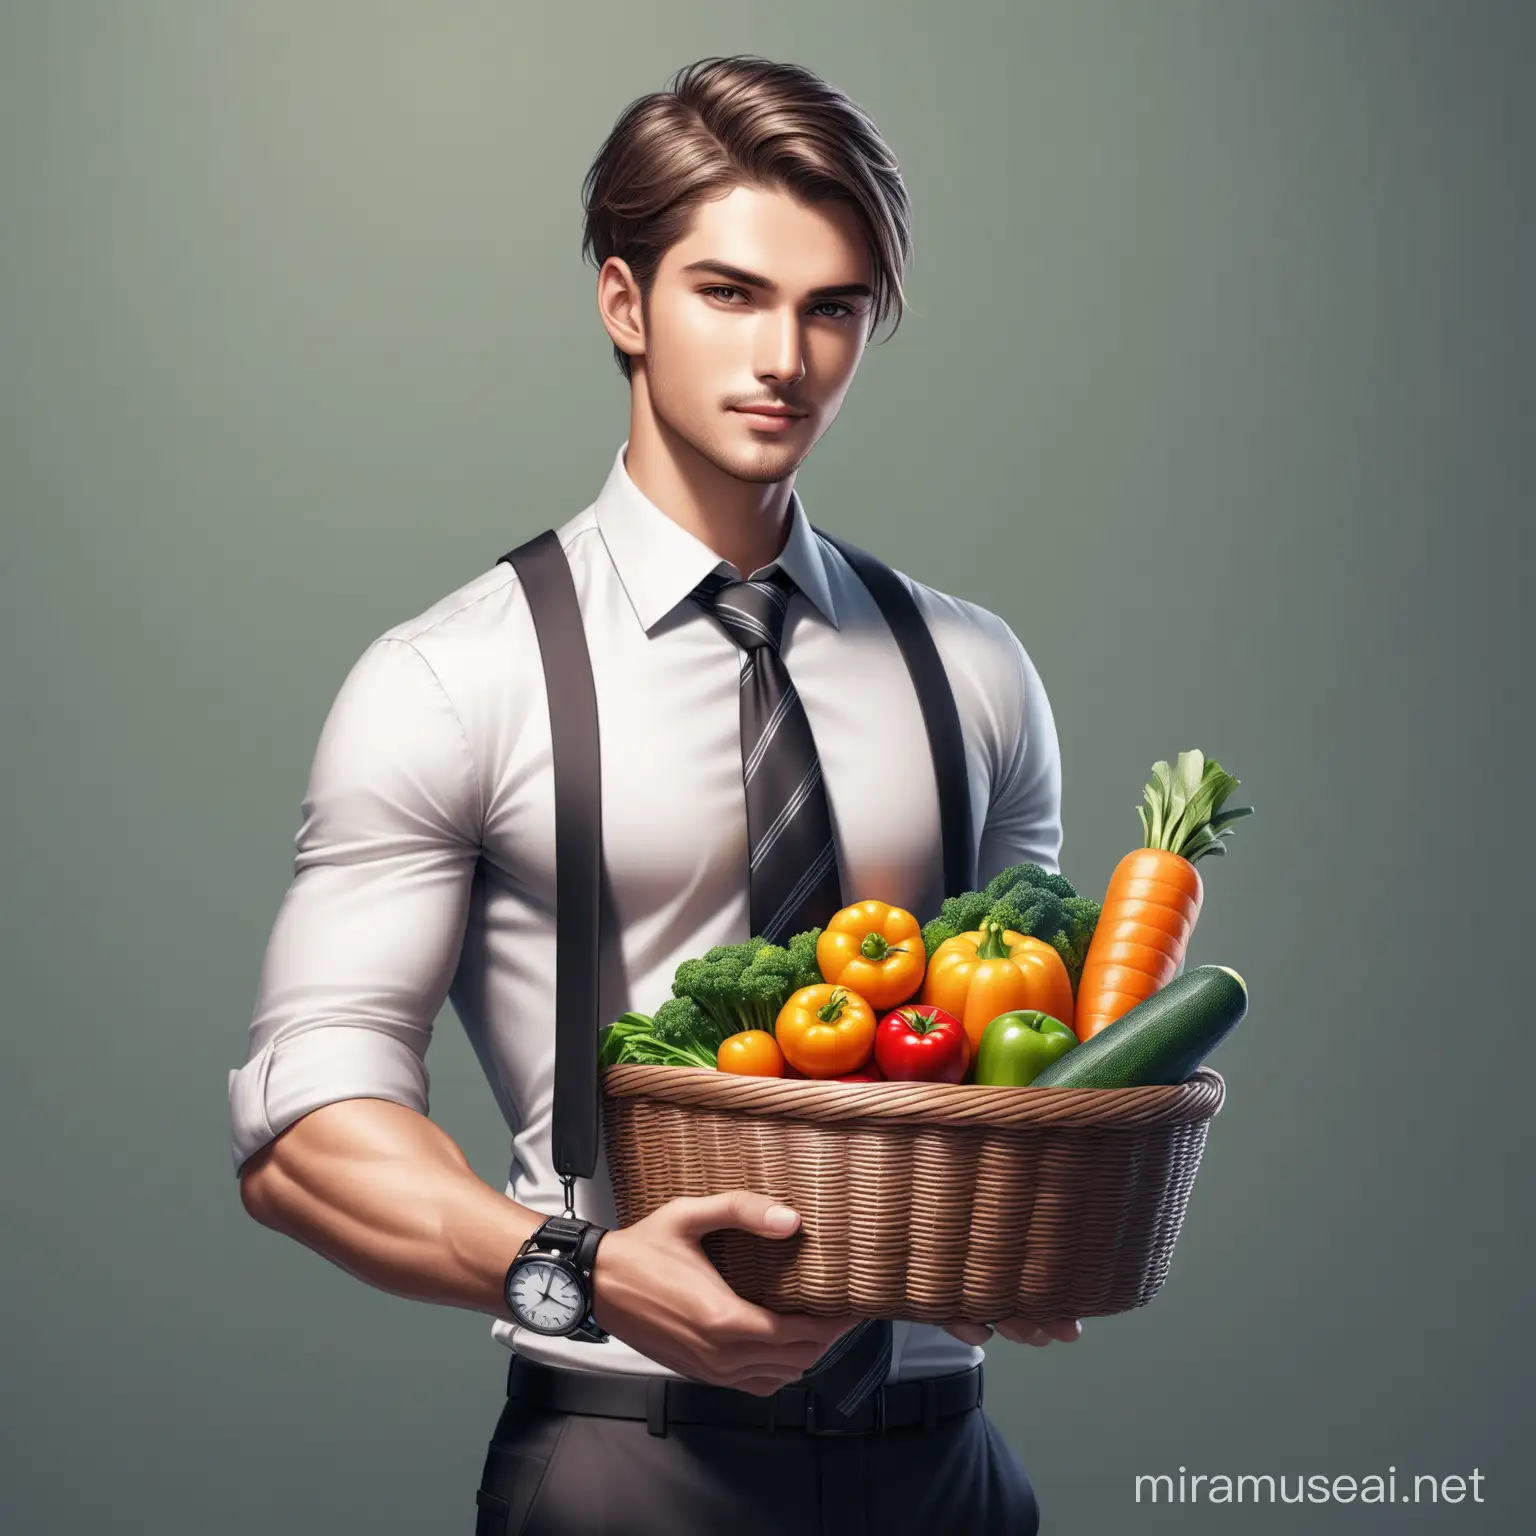 A handsome young man is carrying a basket of vegetables and fruits on his shoulder with one hand, while he has rolled up the sleeves of his shirt, wearing a black watch on his wrist, and also has a tie on his shirt, hyper realistic 3D